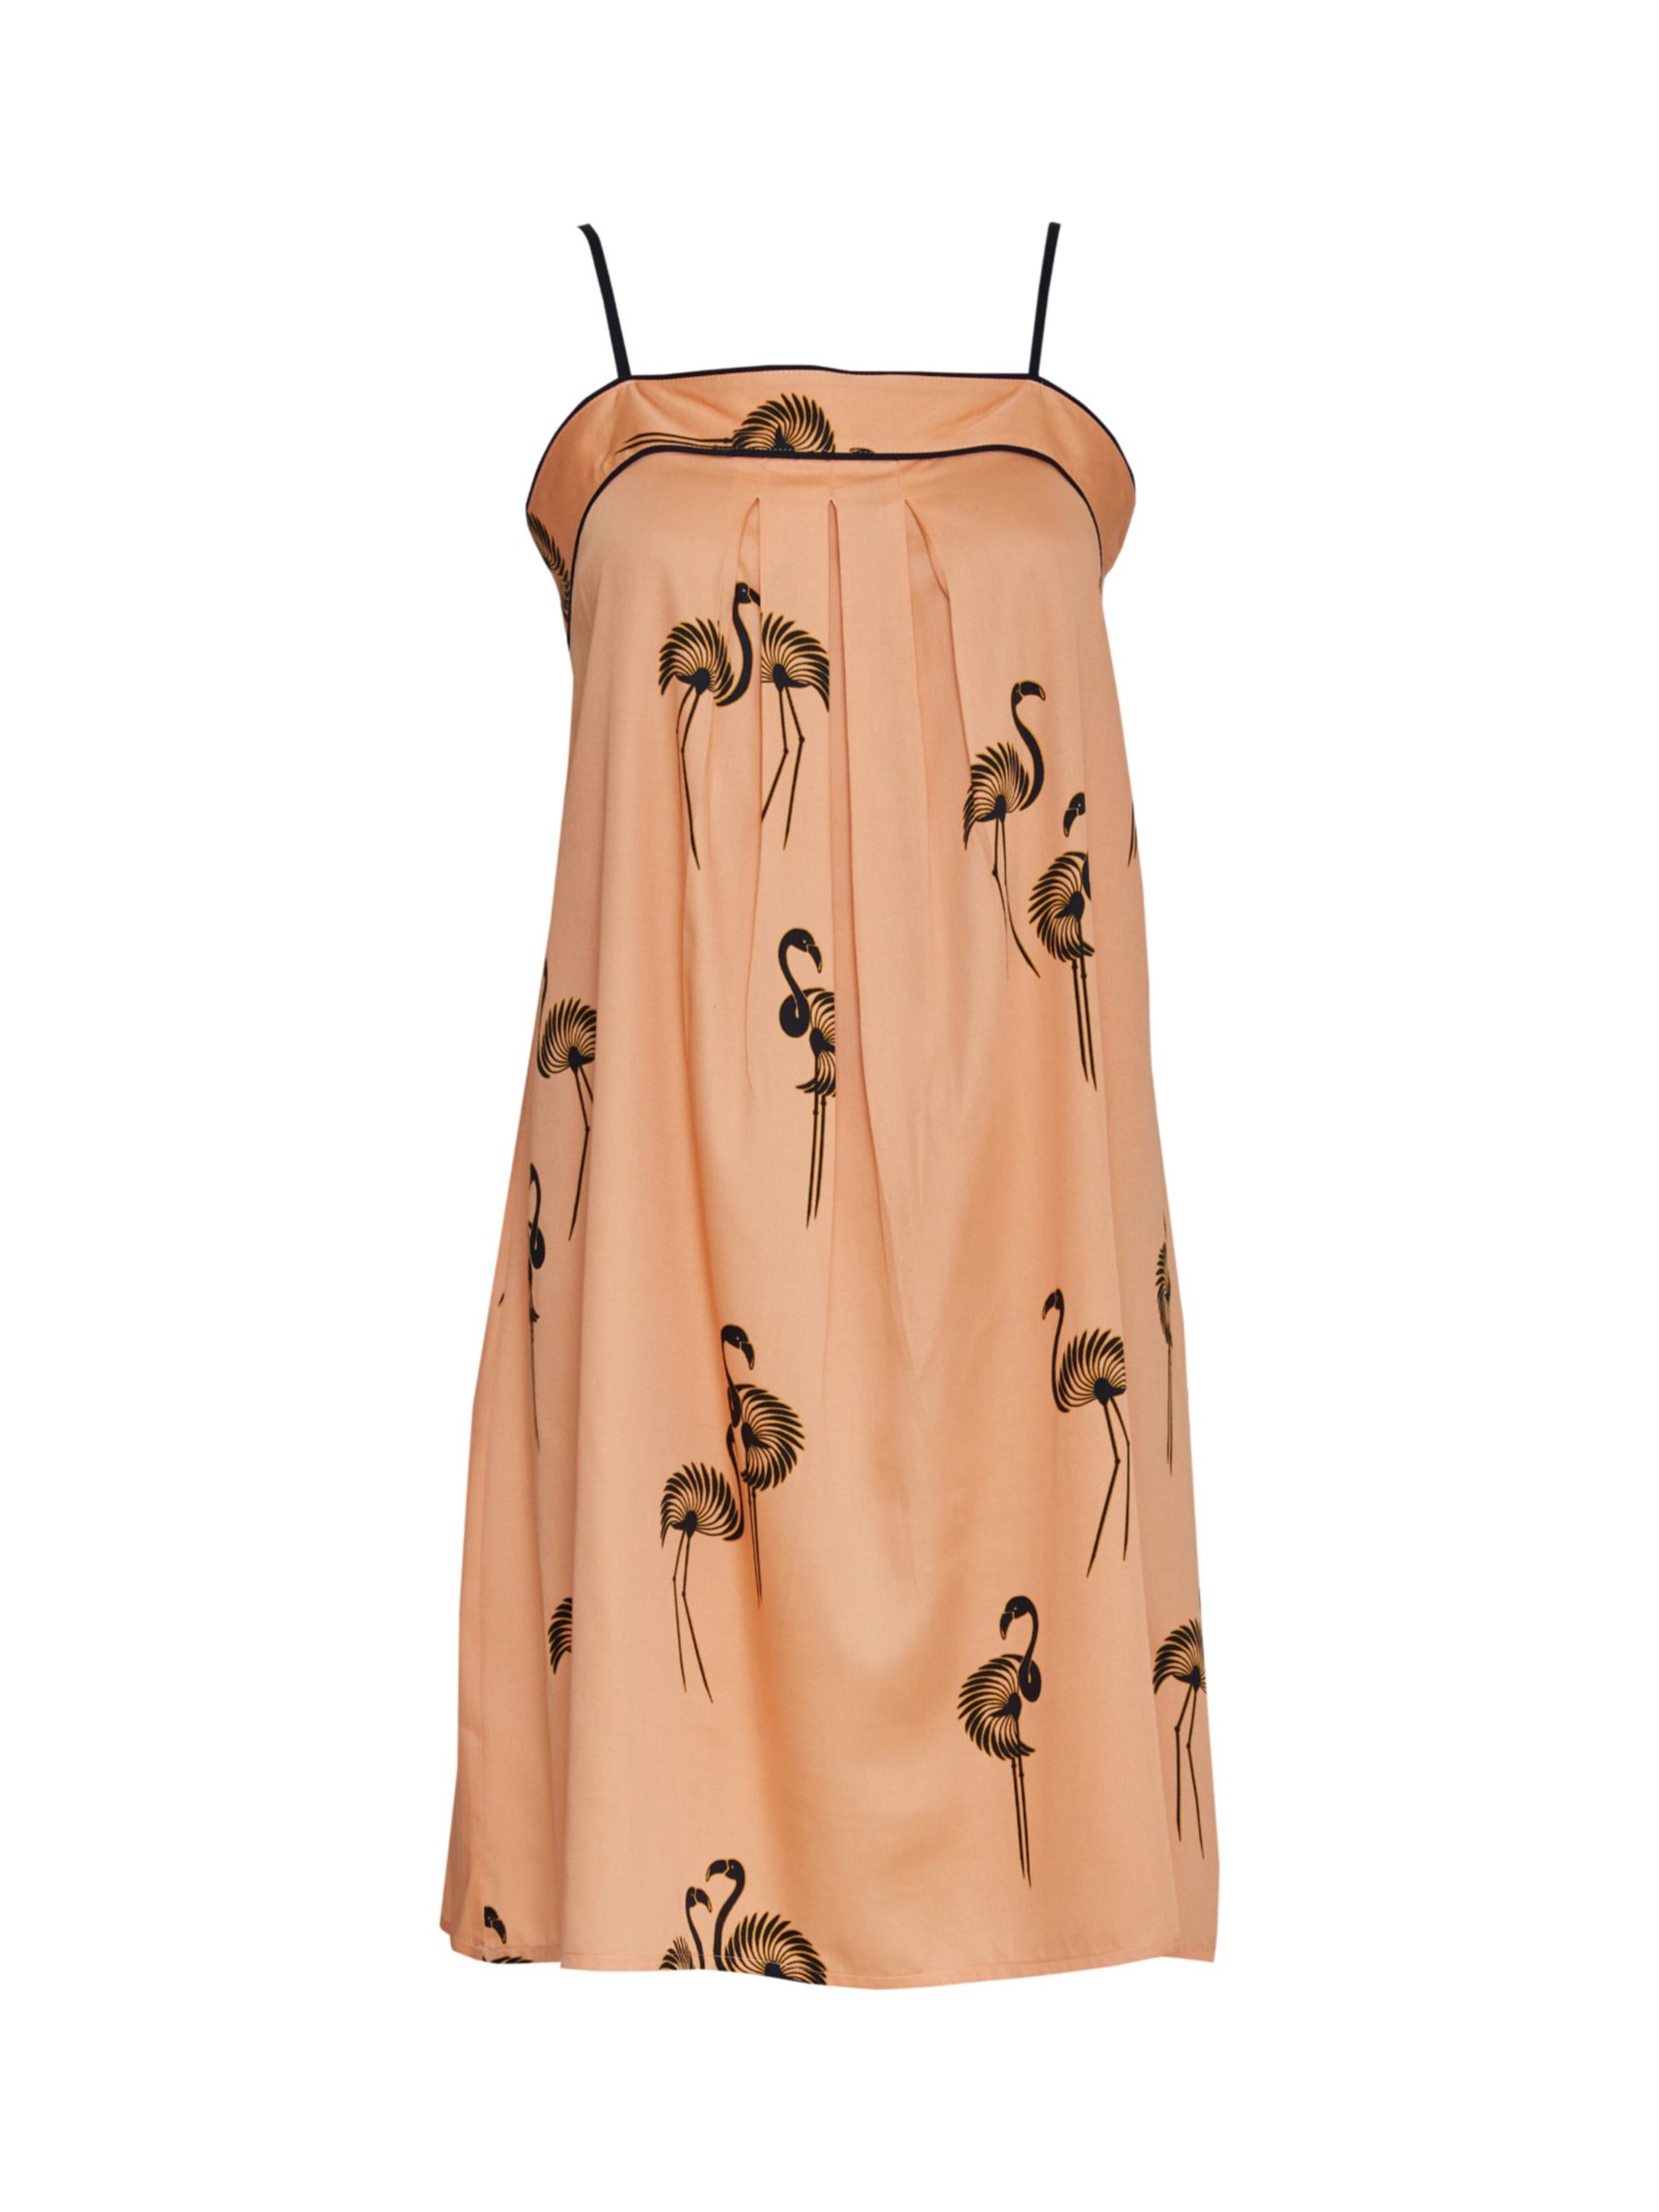 Buy Fable & Eve Flamingo Print Nightdress, Salmon Pink Online at johnlewis.com